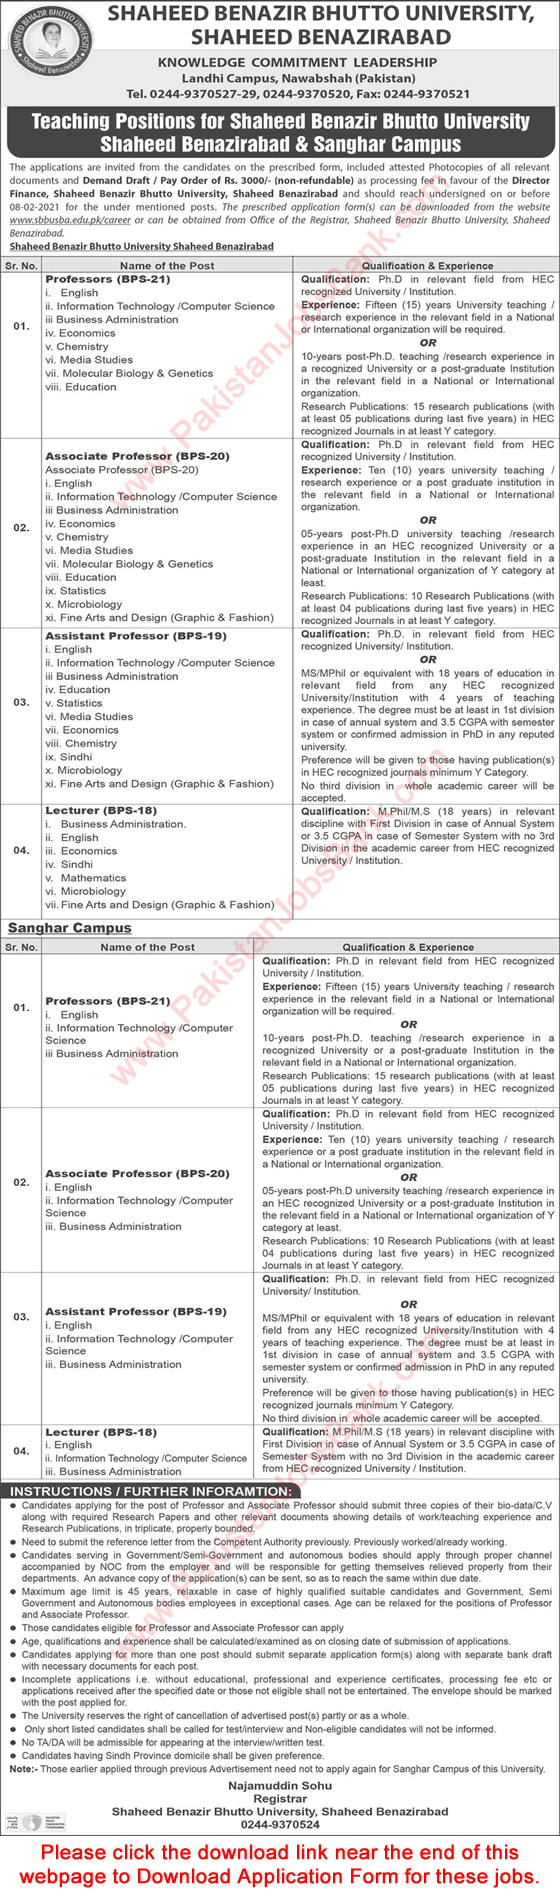 Teaching Faculty Jobs in Shaheed Benazir Bhutto University 2021 Application Form Latest